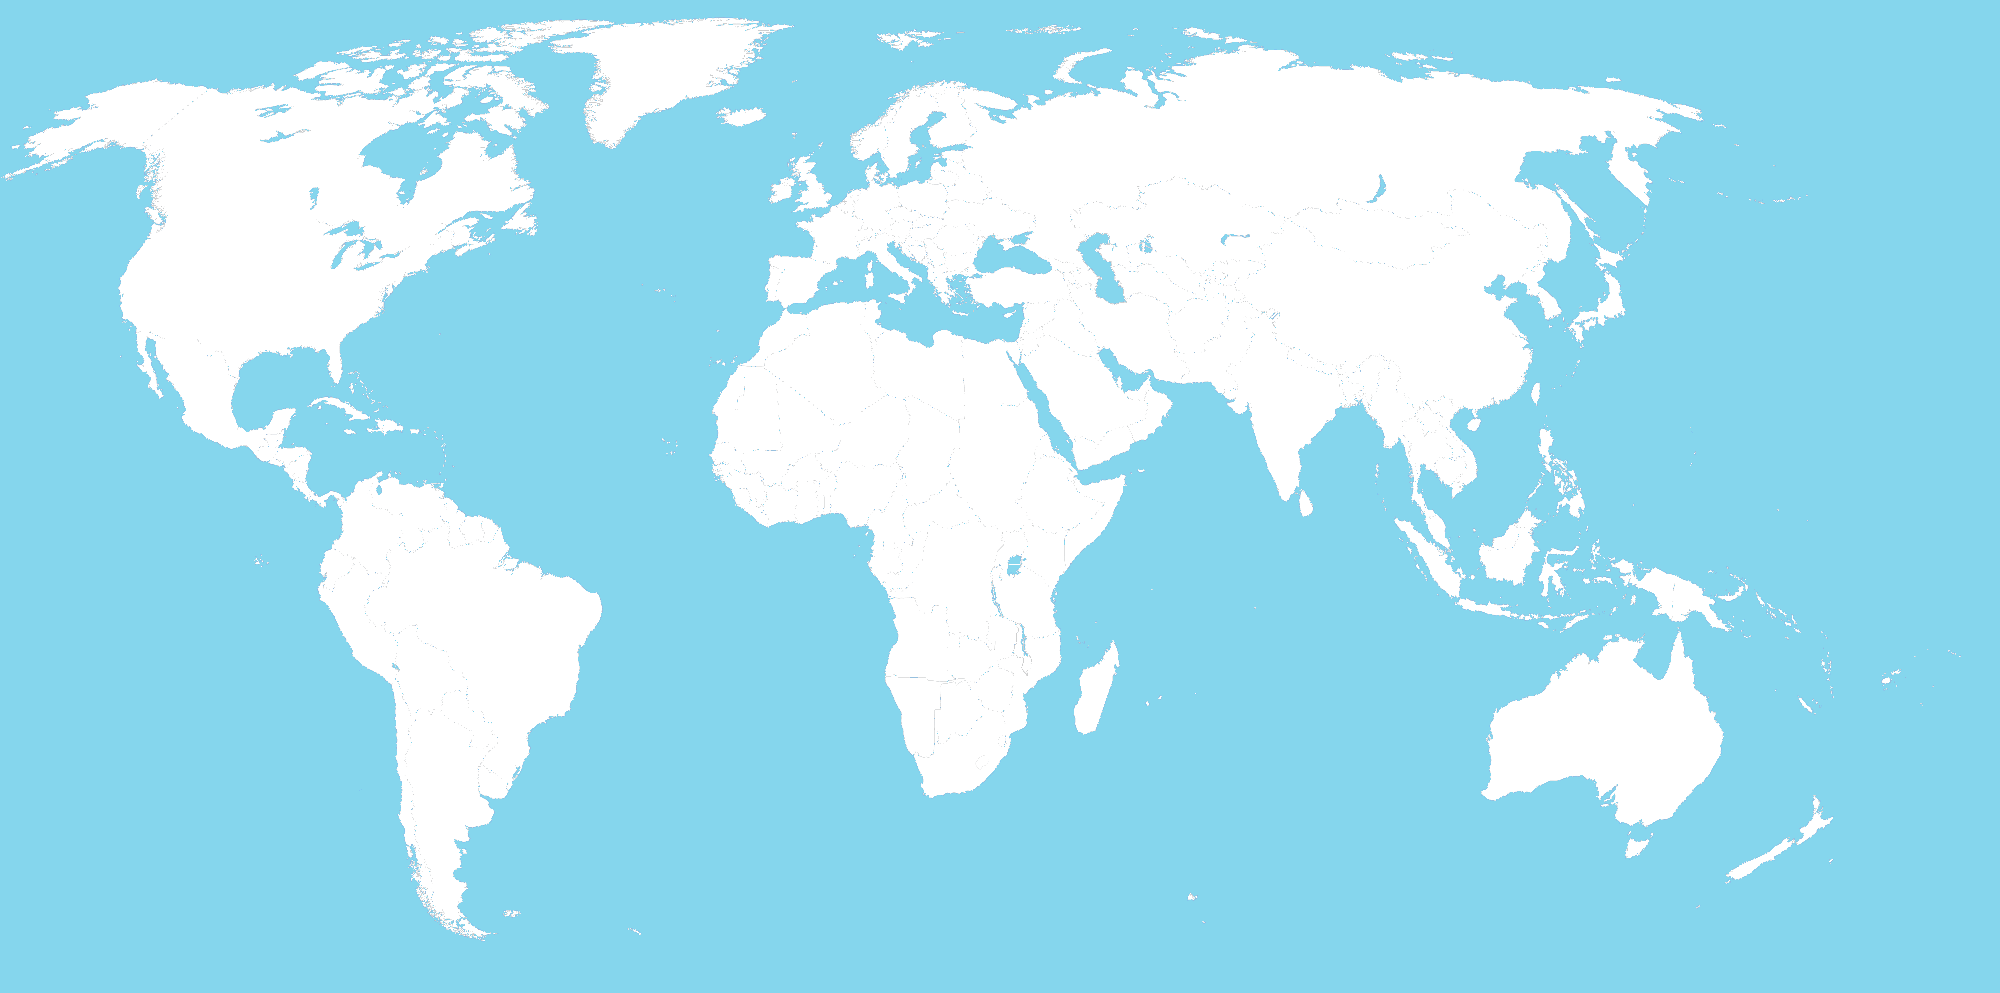 Blank World Map Google Images - London Top Attractions Map